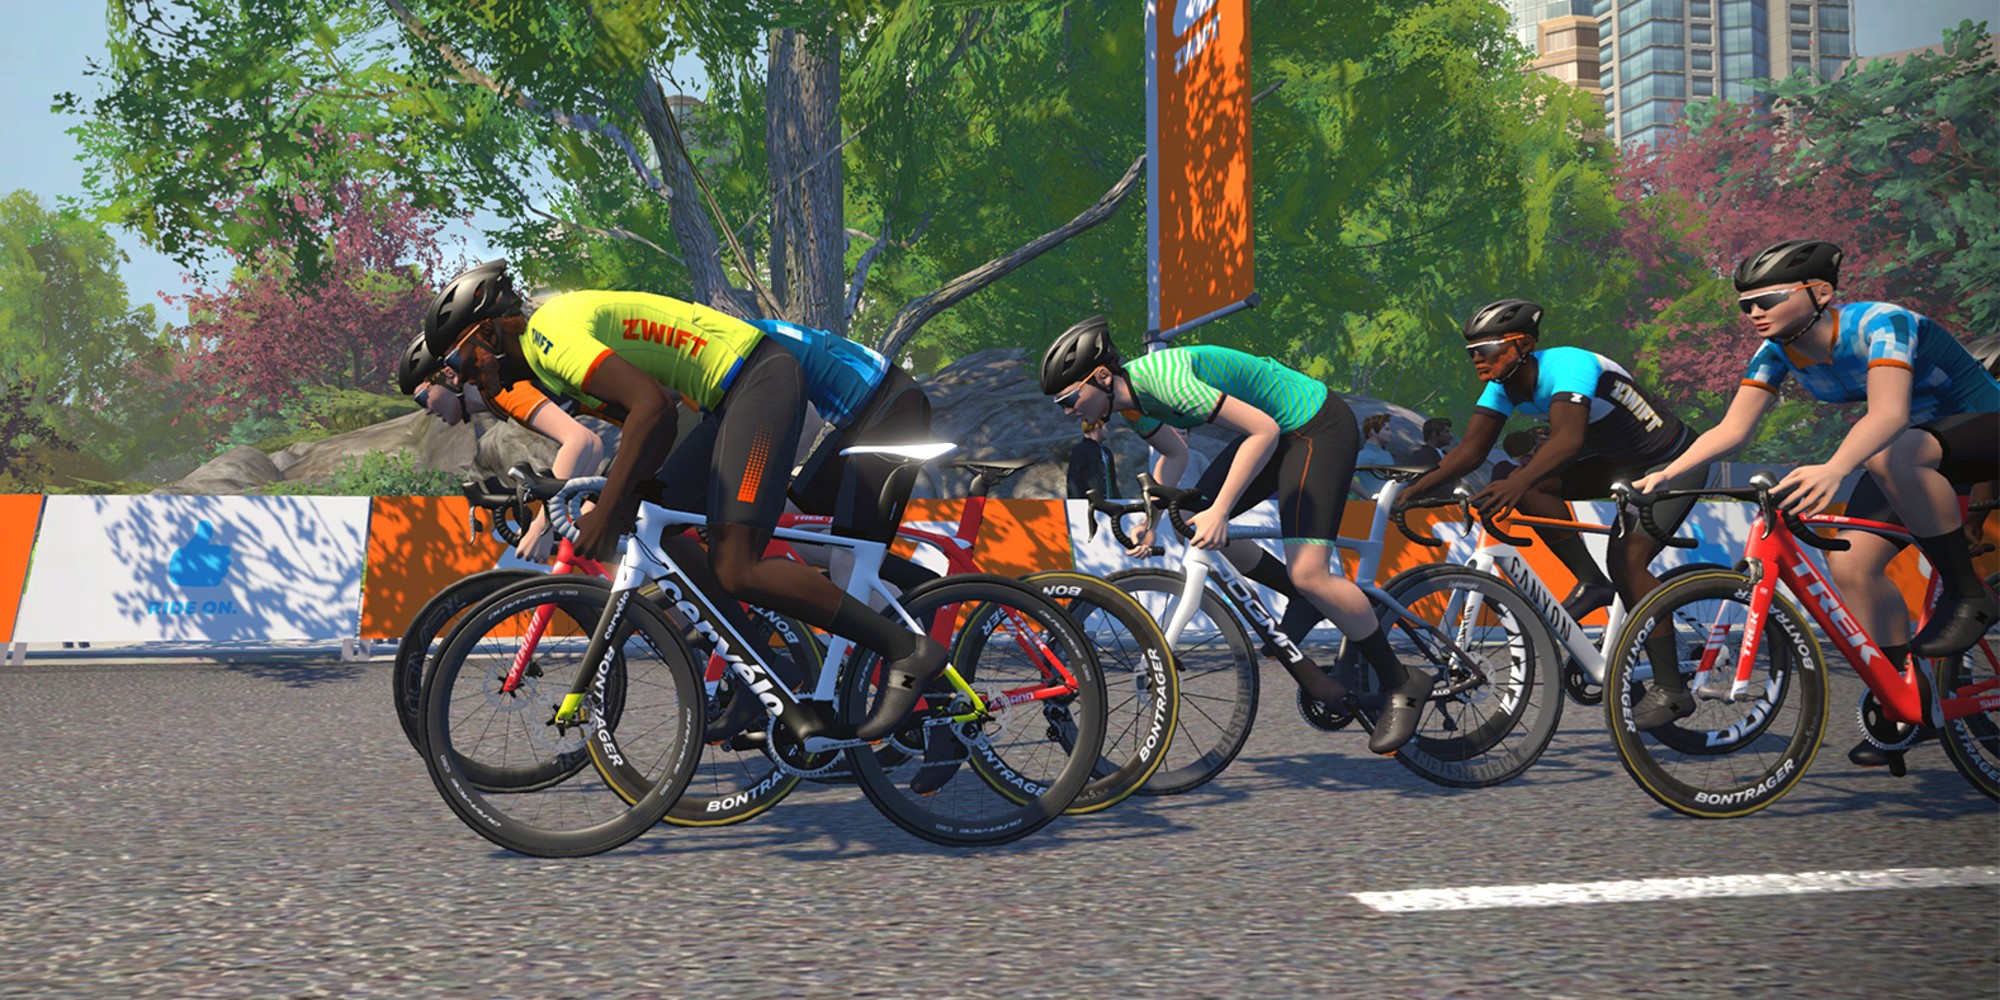 Zwift shares product roadmap through to end of 2022 - Events